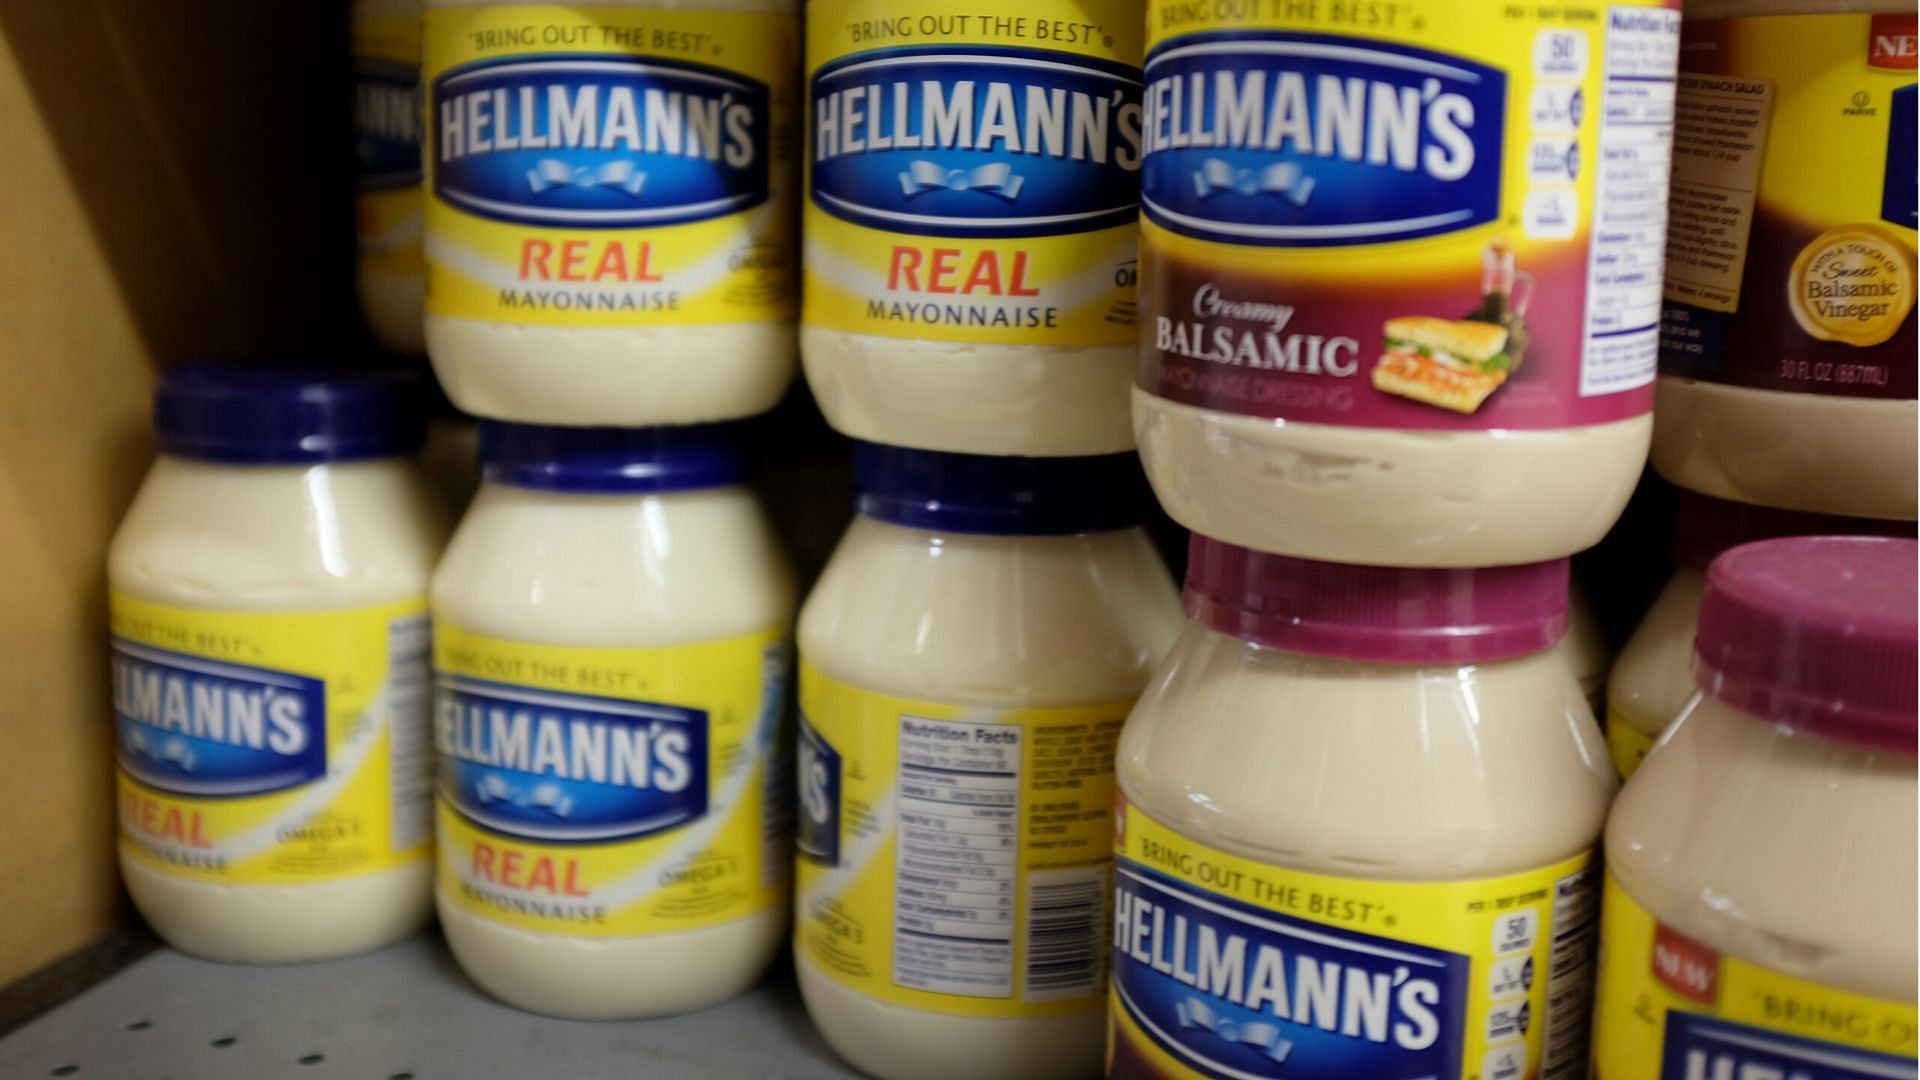 The Unilever-owned Mayo brand, Hellmann&#039;s, is displayed on shelves in a grocery store (Image via Joe Raedle/Getty Images)